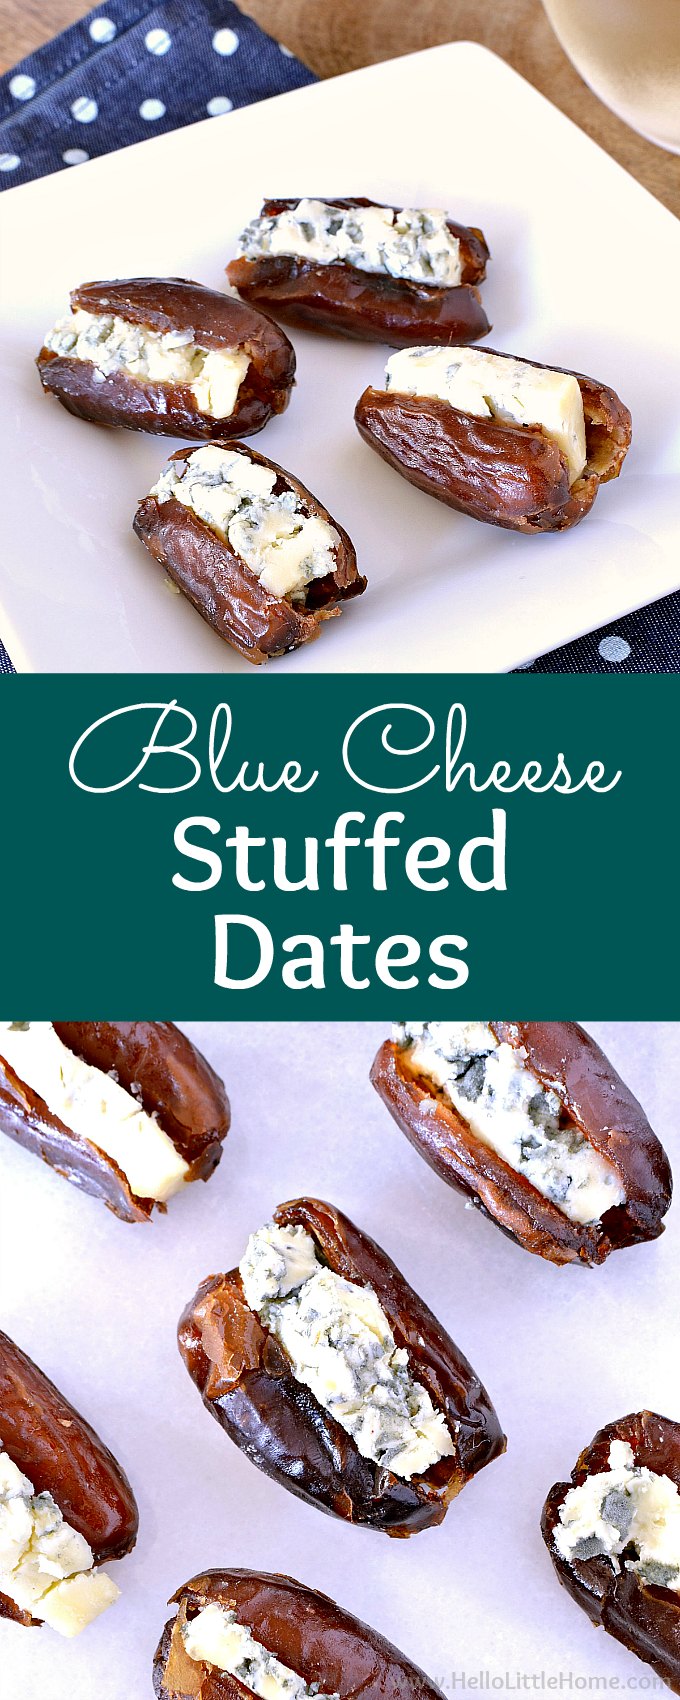 Blue Cheese Stuffed Dates Recipe! These savory vegetarian stuffed dates are an awesome party appetizer idea with only two ingredients: medjool dates and blue cheese. Learn how to make this sweet and salty stuffed dates recipe with gorgonzola or your favorite blue cheese. These gluten free blue cheese stuffed dates are a simple, easy to make finger food that everyone will love! | Hello Little Home